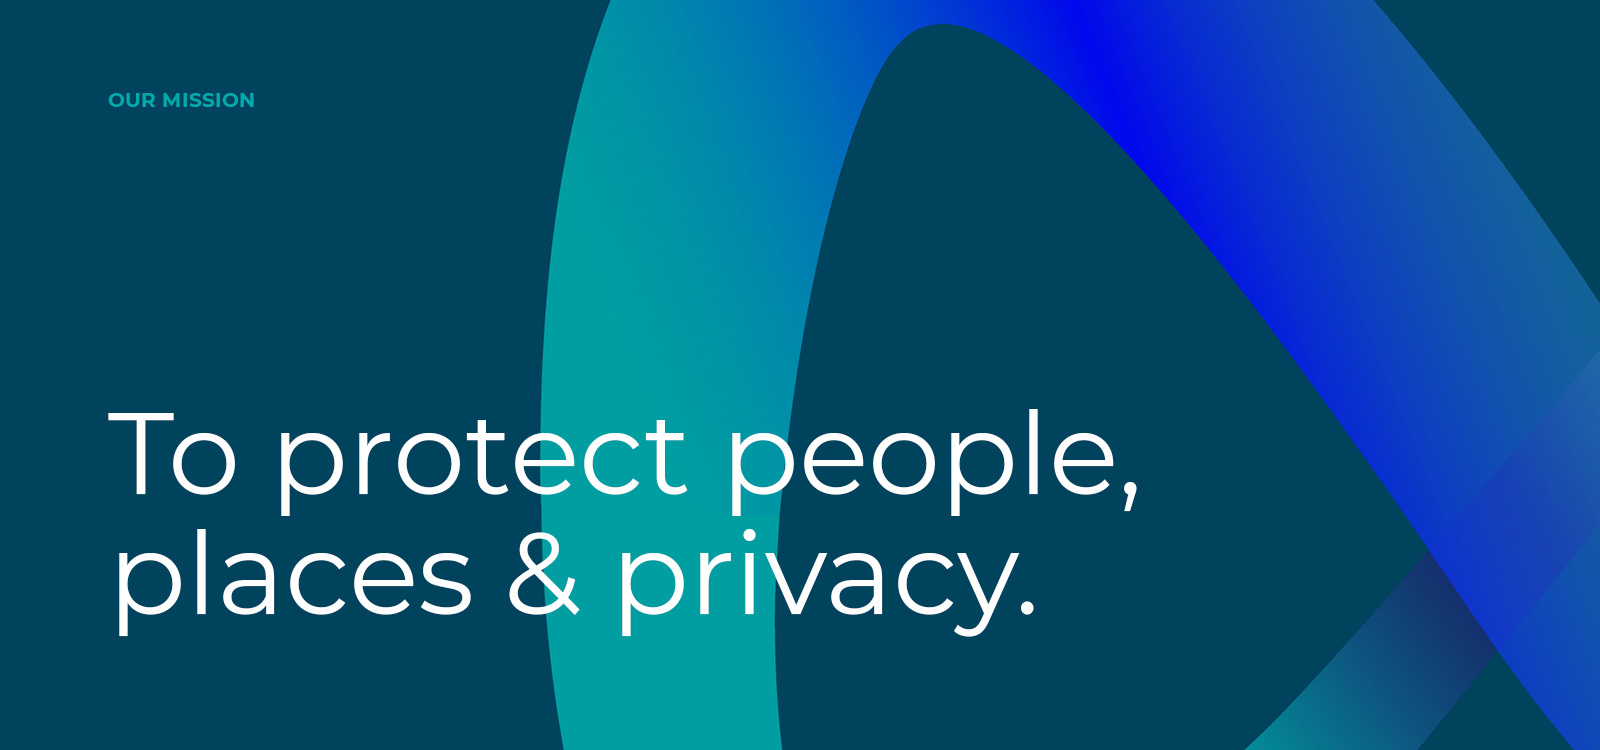 Our mission: to protect people, places and privacy